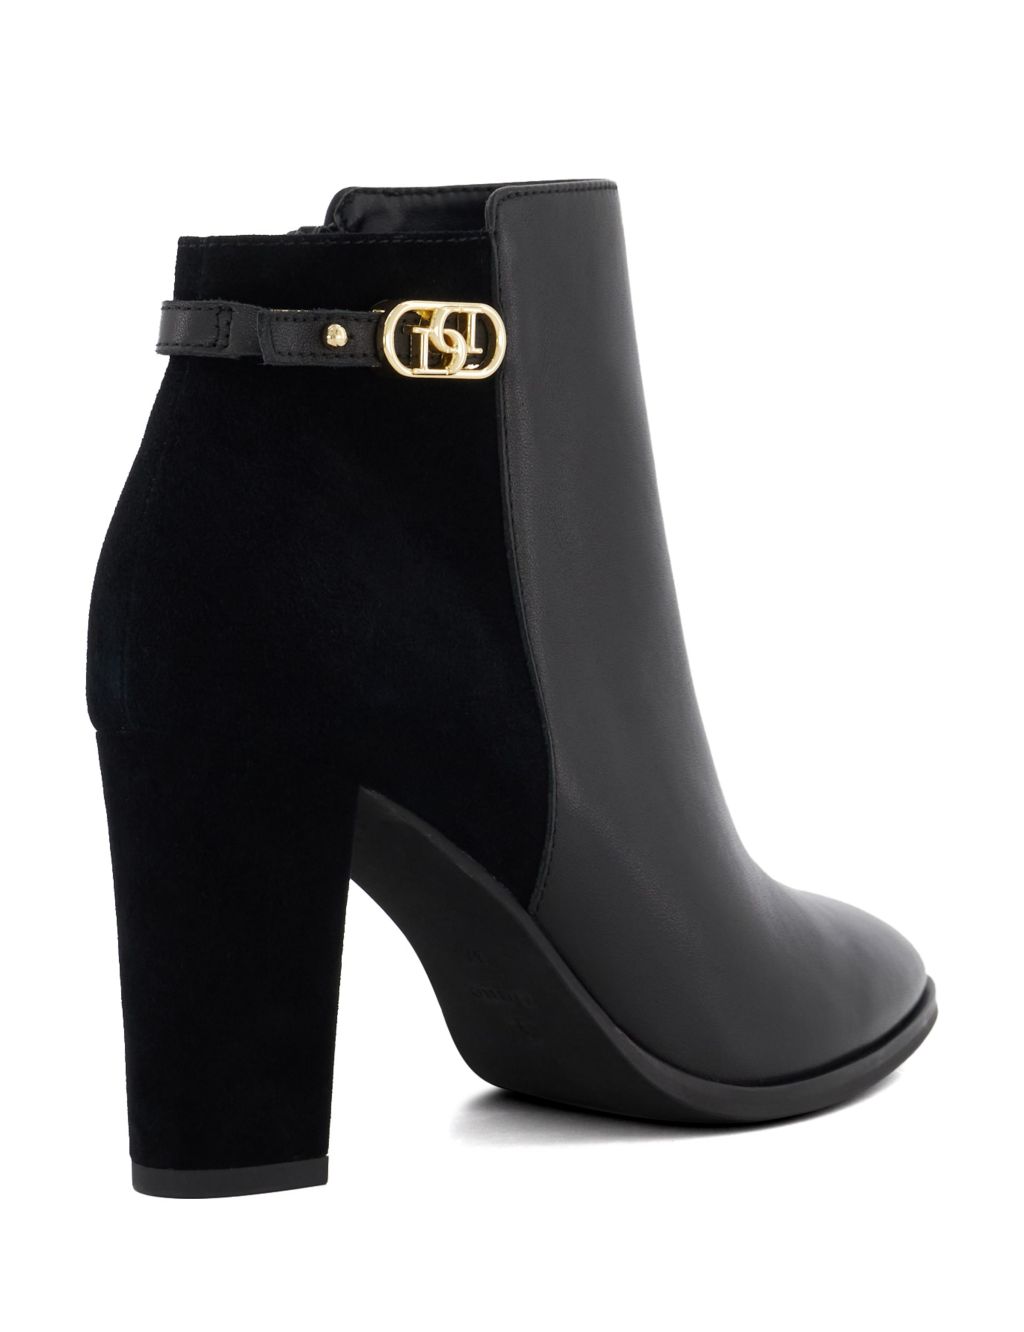 Leather Buckle Block Heel Ankle Boots image 4